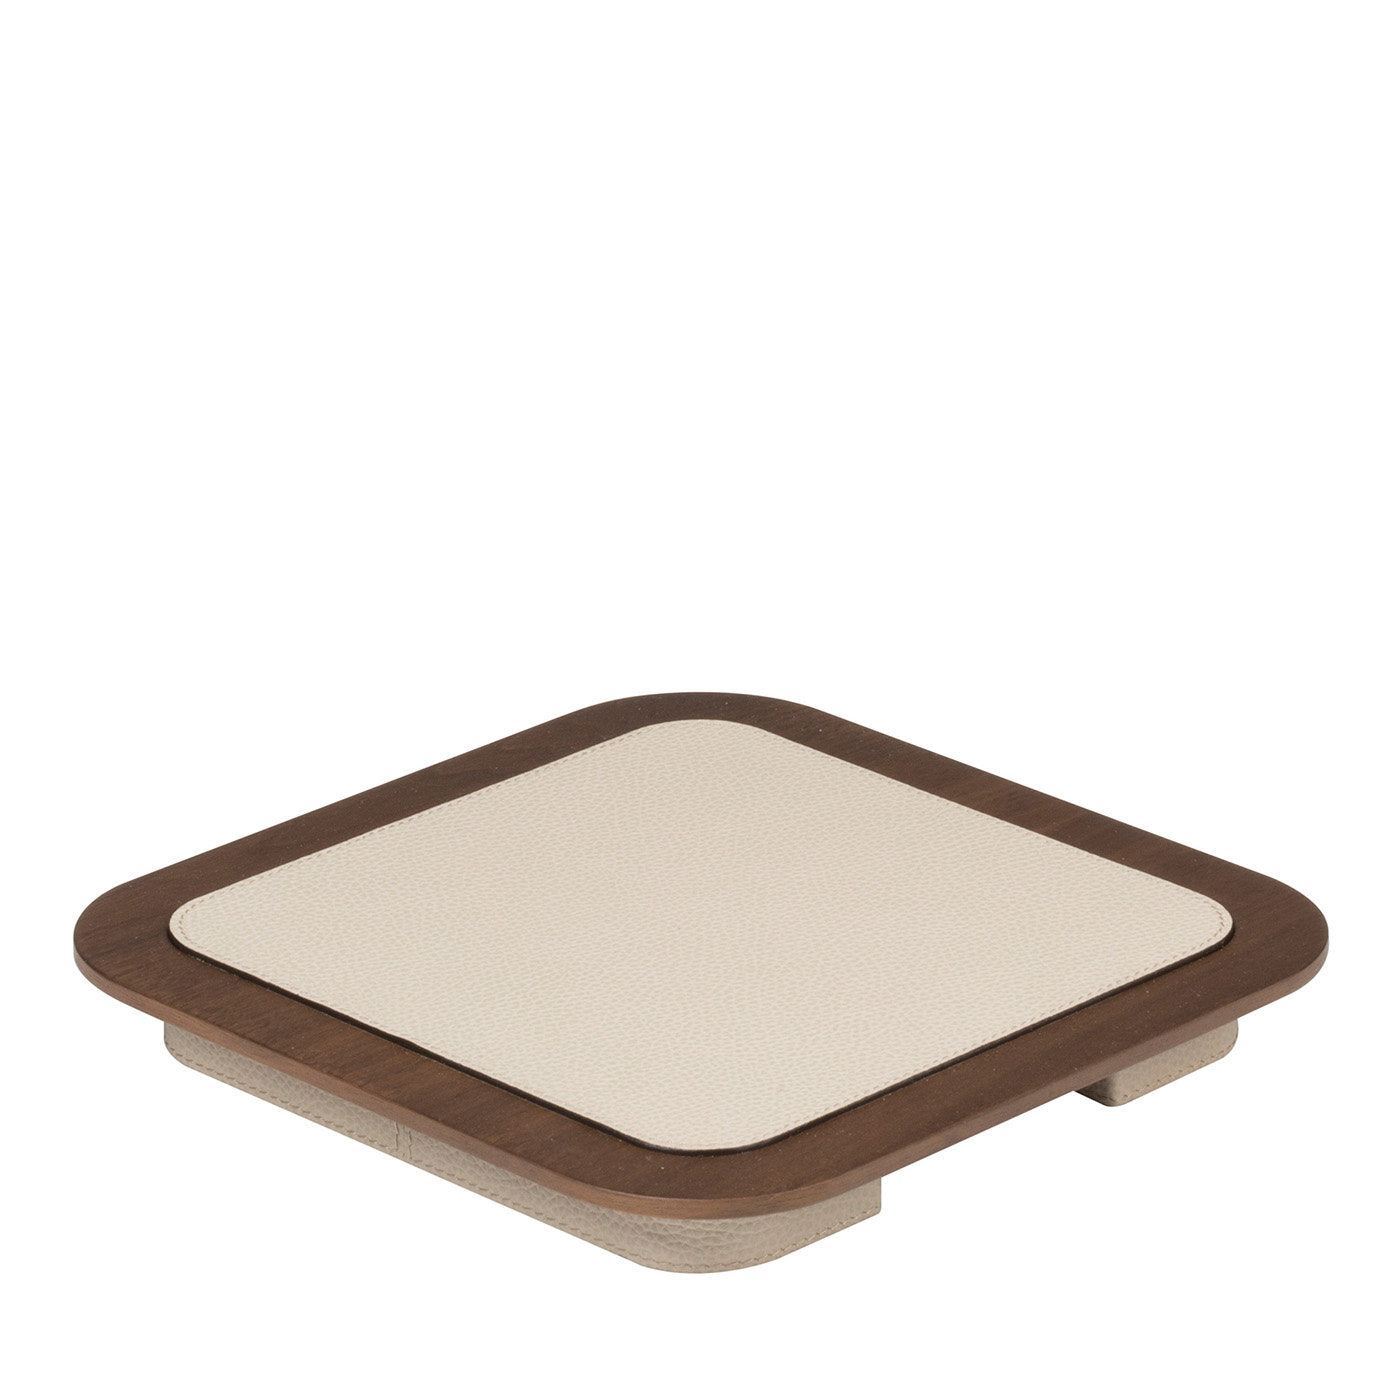 Lloyd Square Tray N. 2 in Beige and Walnut - Main view